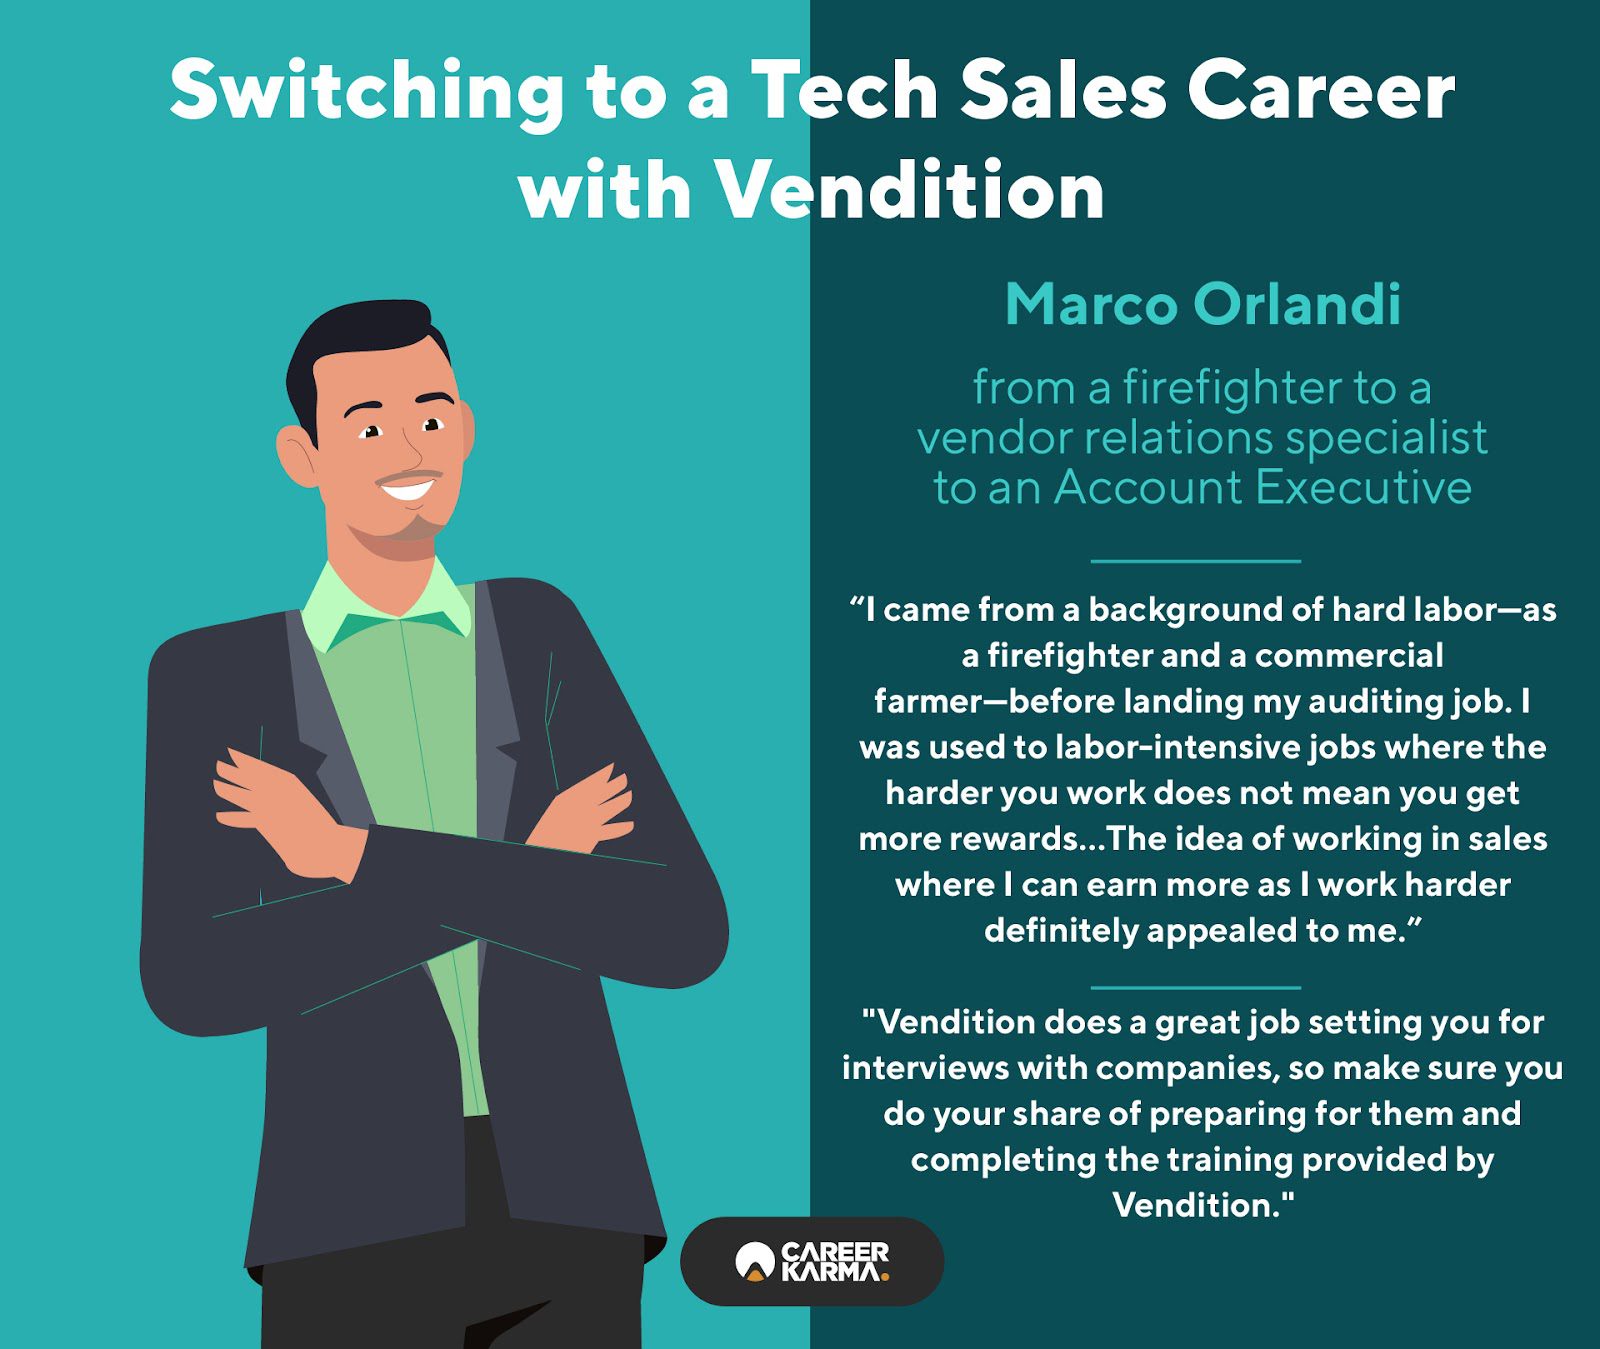 An infographic featuring Marco Orlandi’s review of Vendition